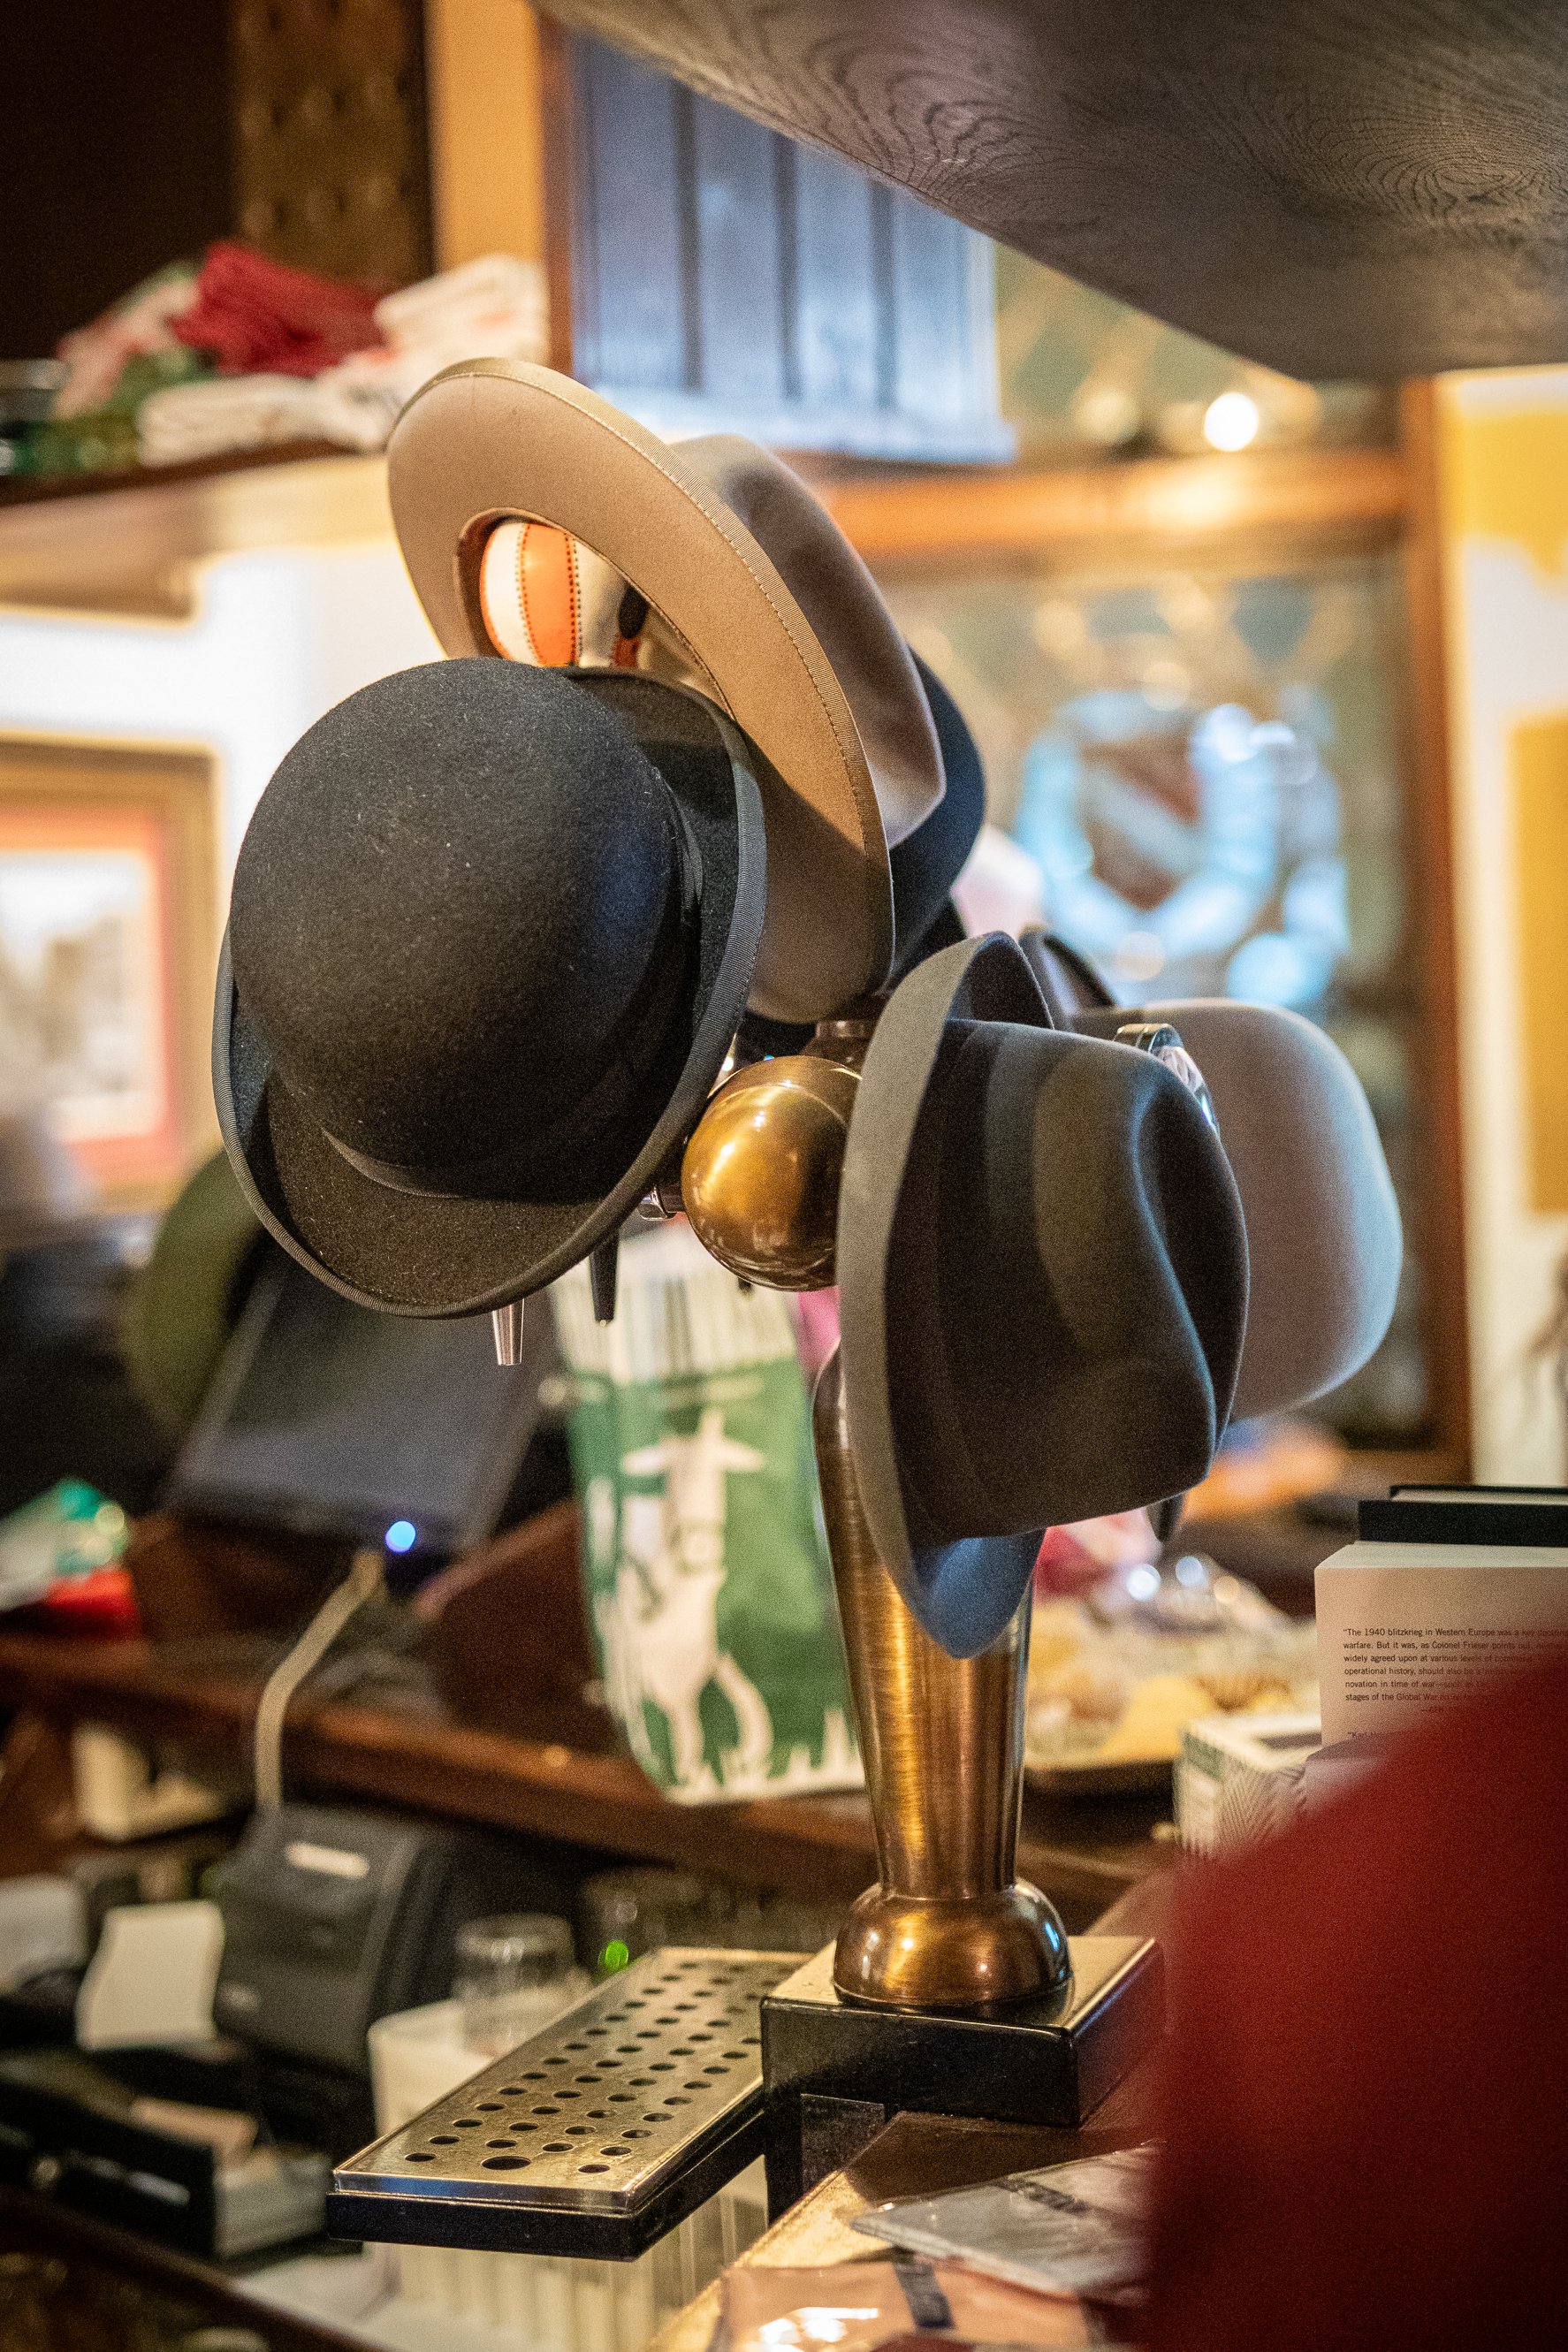 It's become traditional that the beer pump is put into service as a hat stand